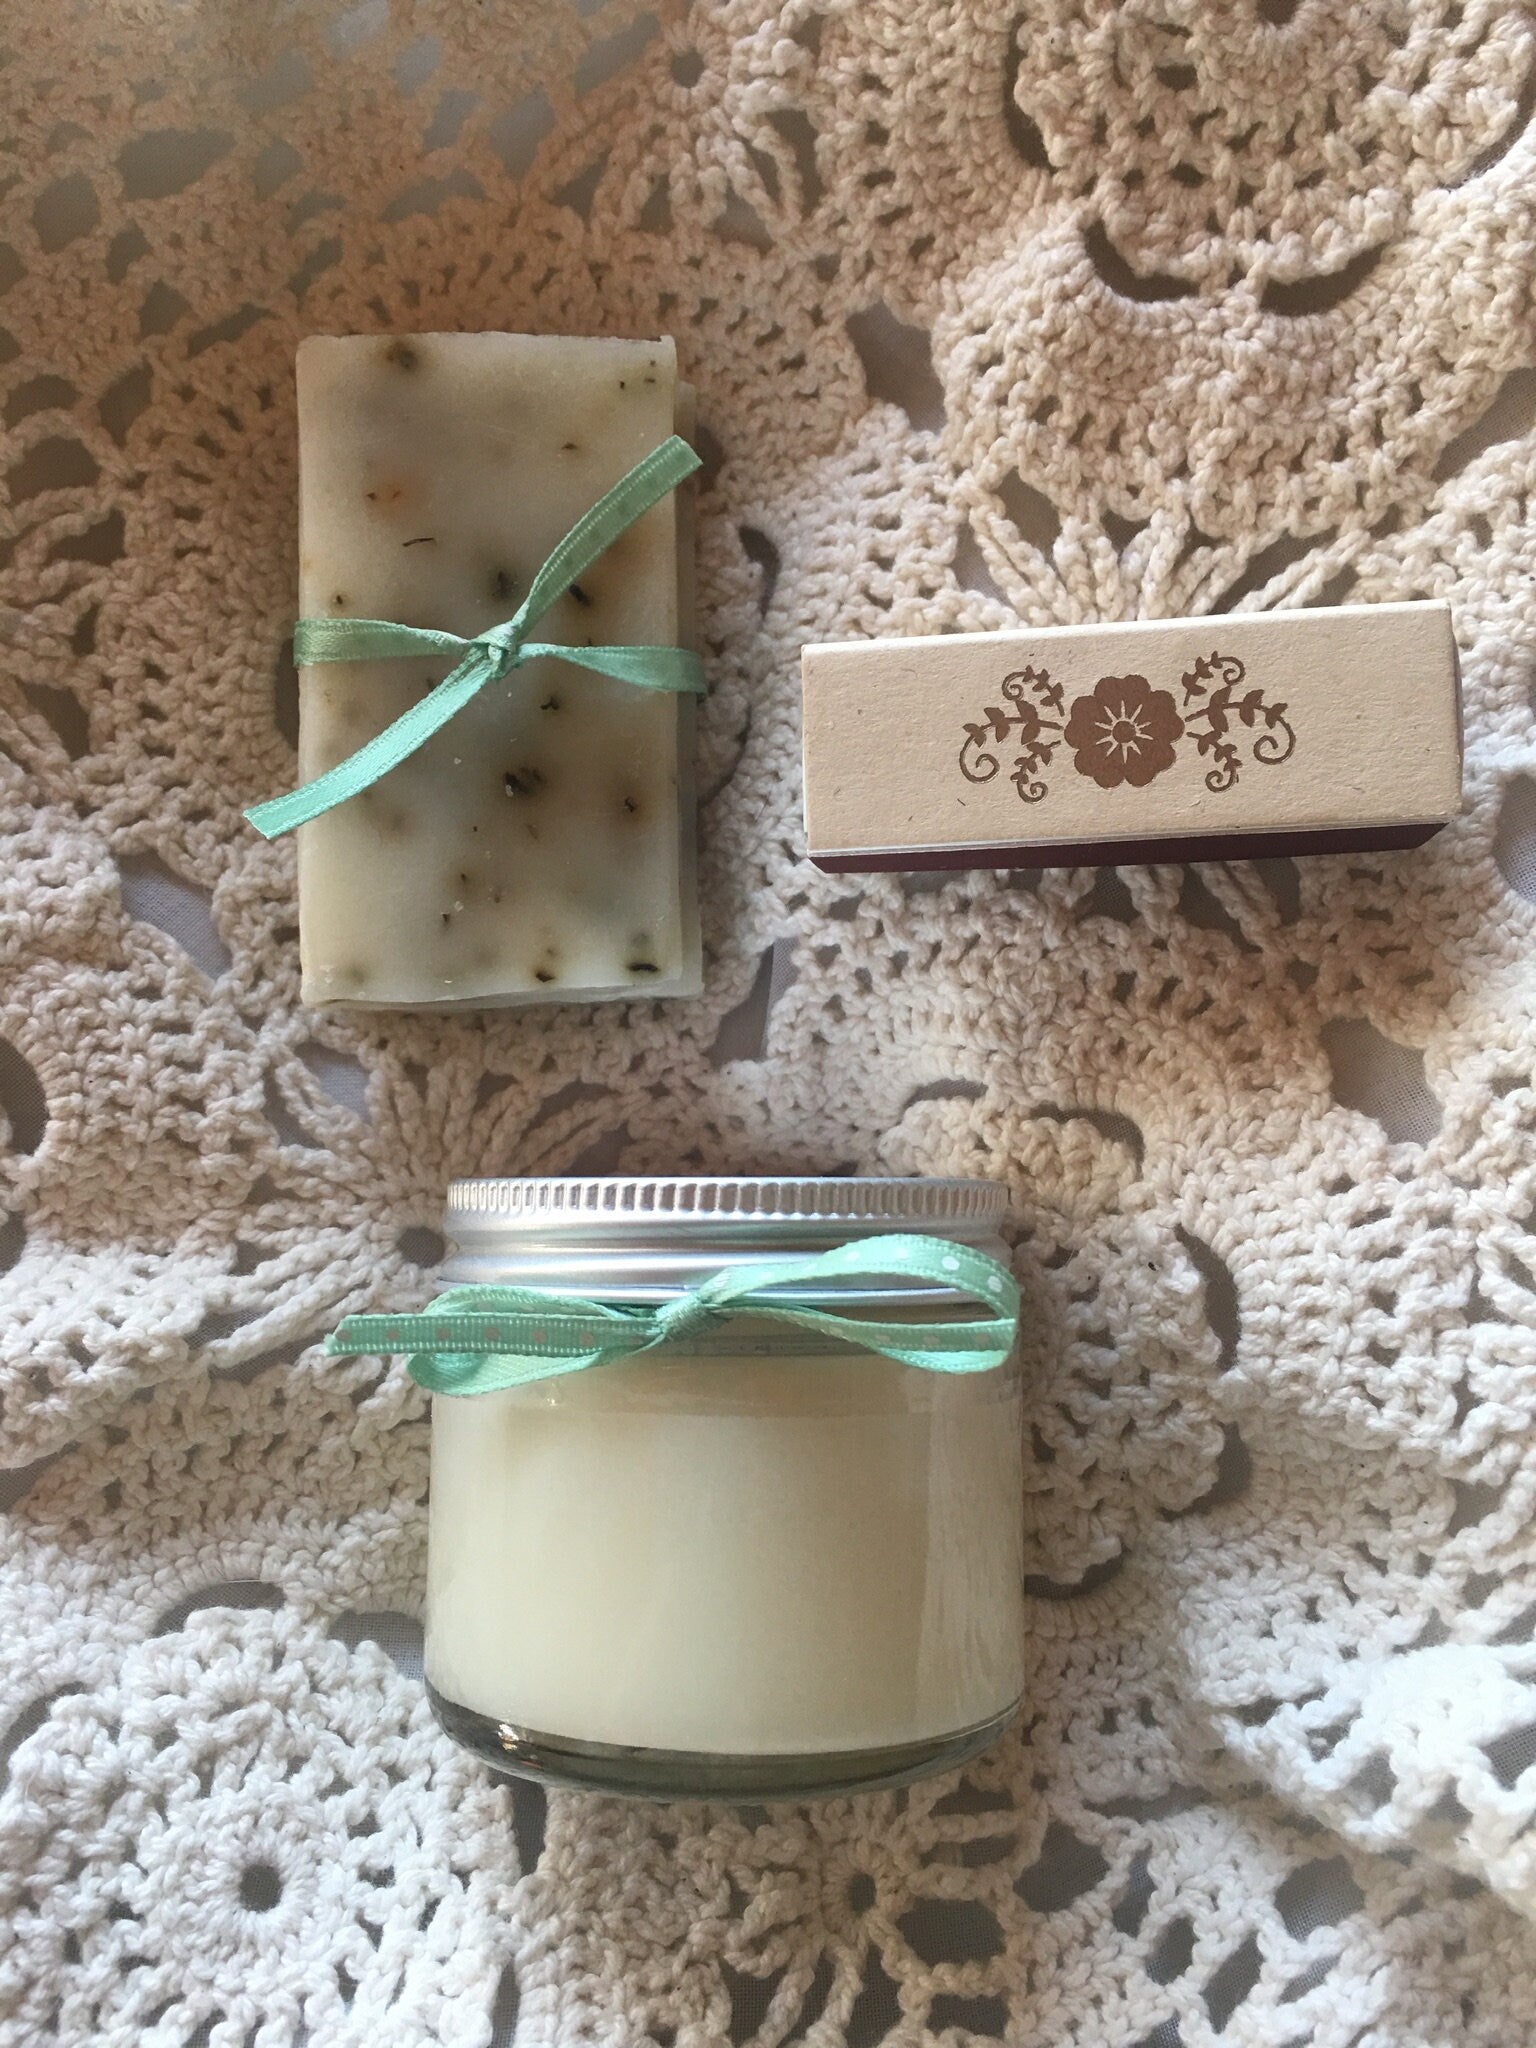 Artisan Soap and Soy Candle Gift Set in Vermont Wooden Box -Bridal Party-Hostess Gift--Belle Savon Vermont